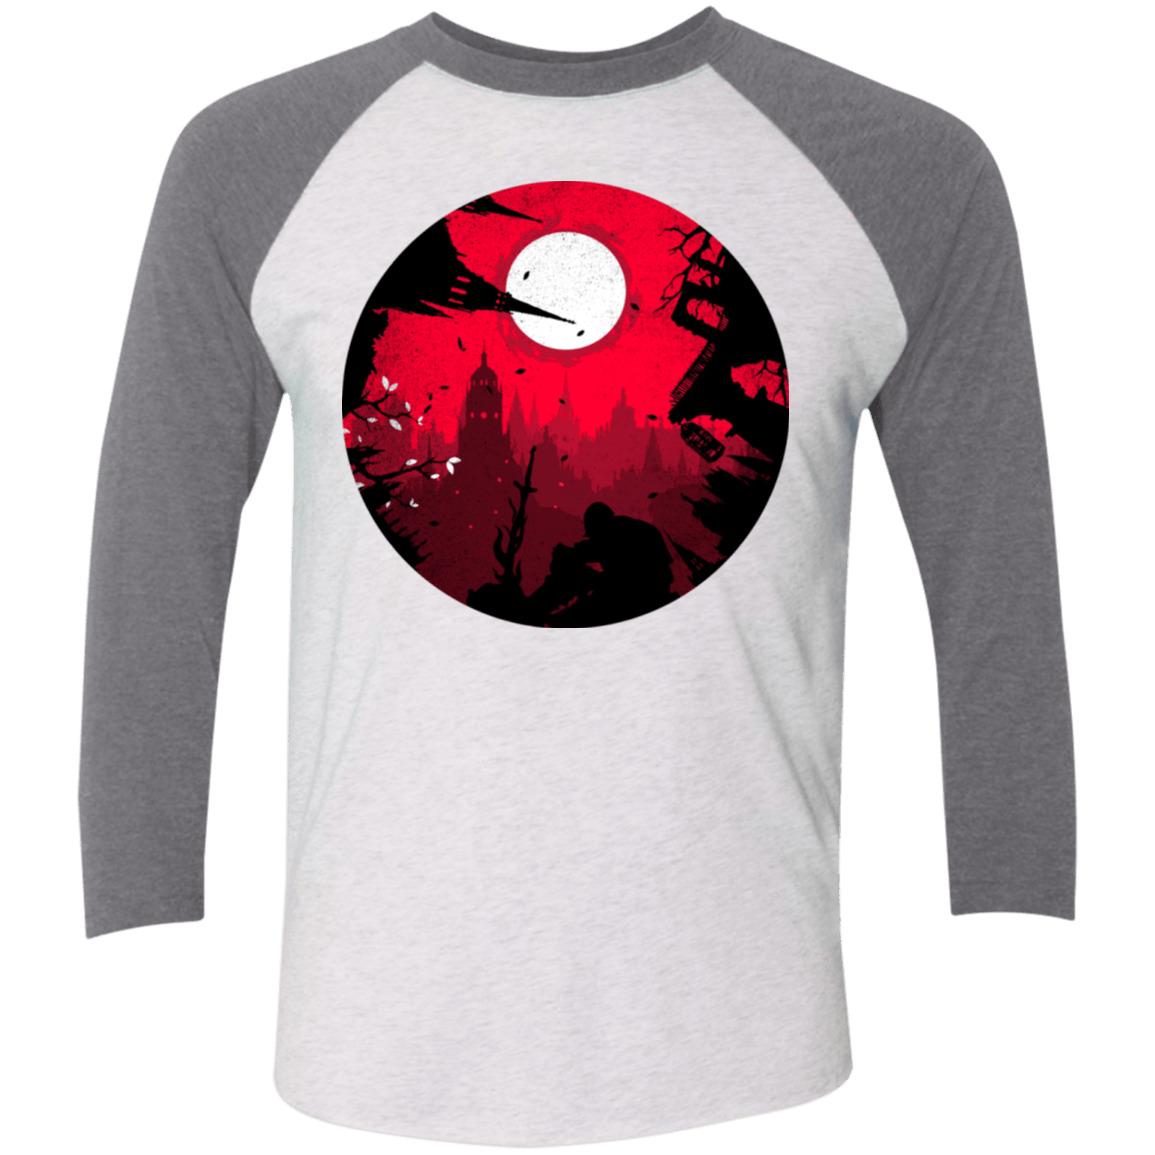 T-Shirts Heather White/Premium Heather / X-Small Embrace the Darkness Men's Triblend 3/4 Sleeve